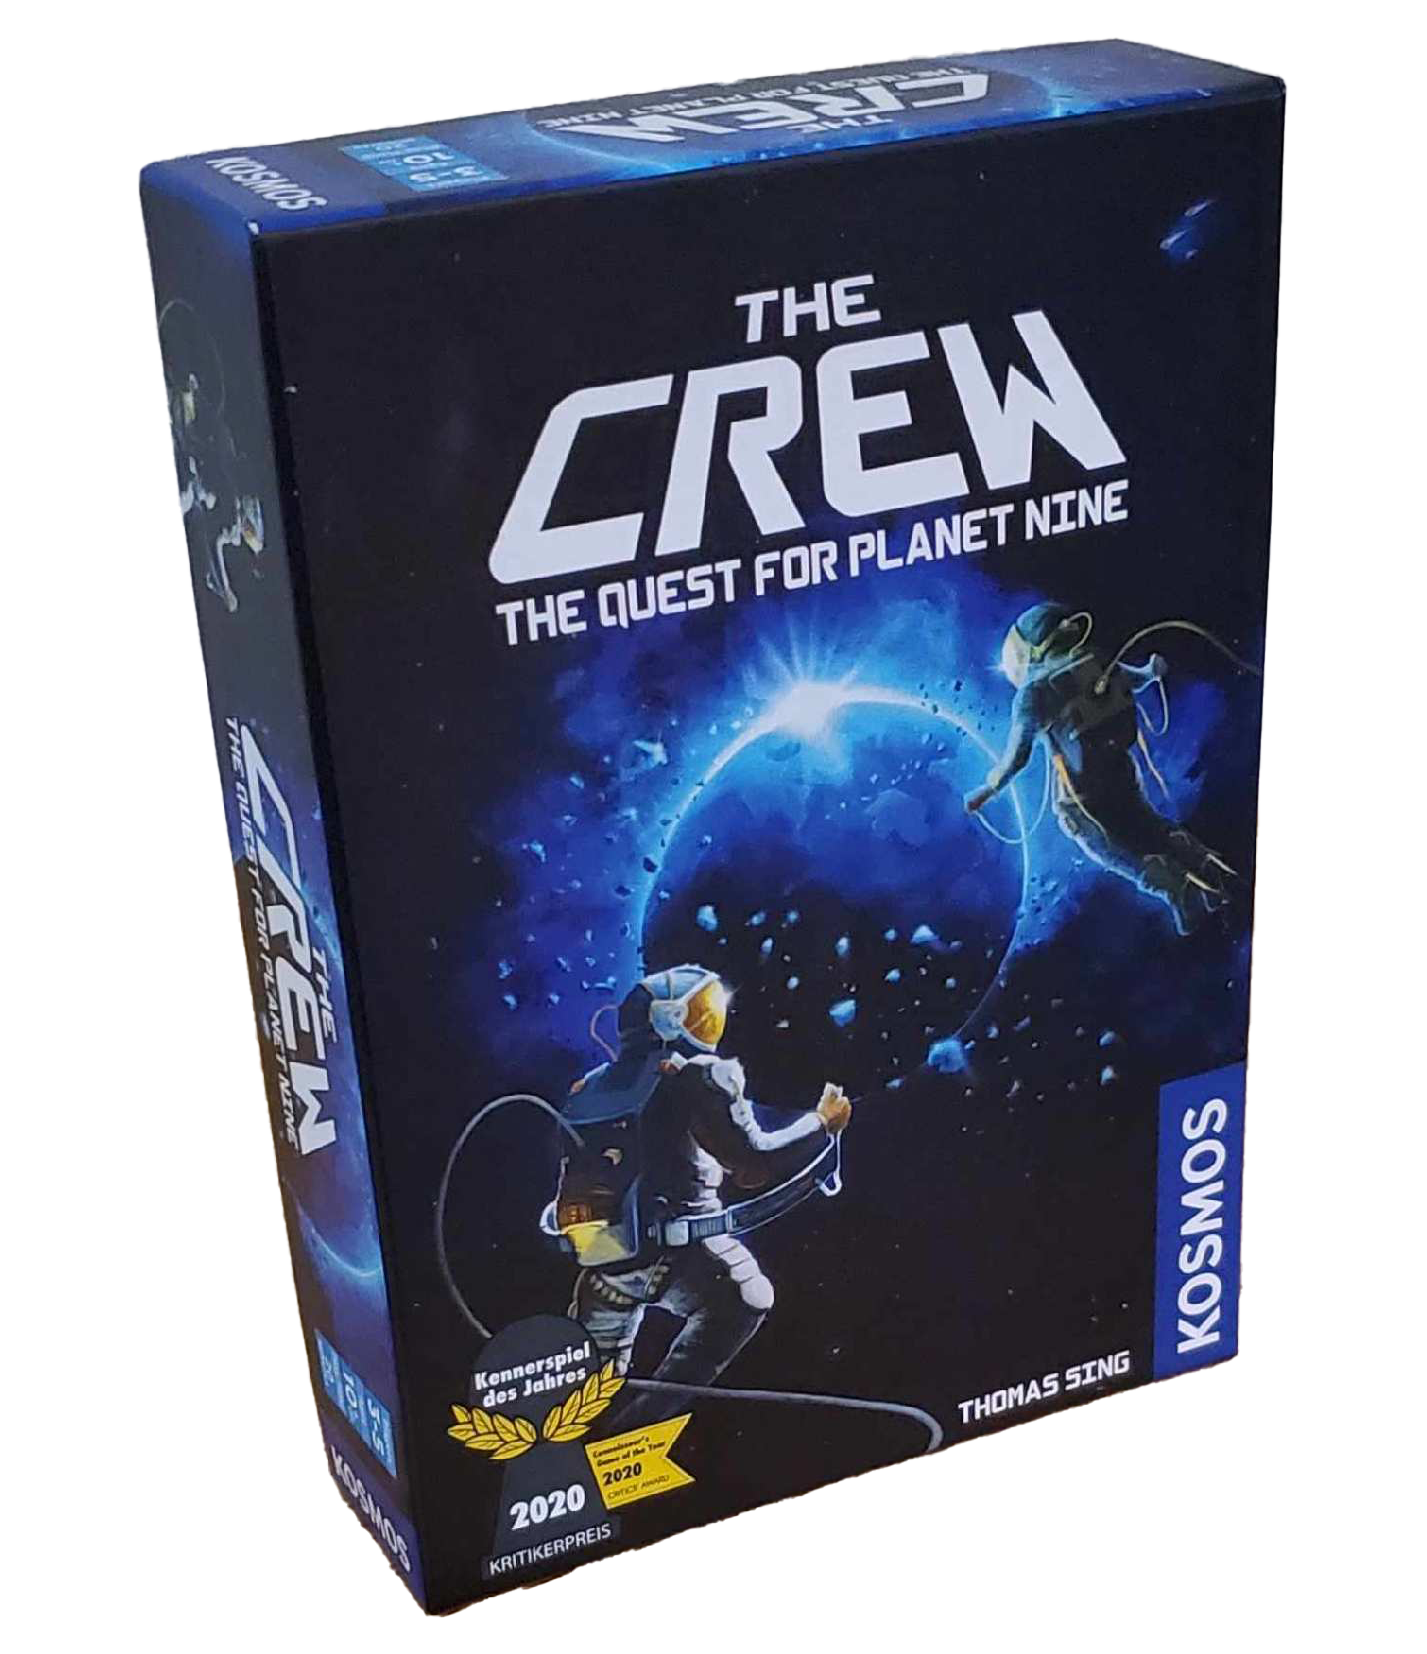 The Crew The Quest for Planet Nine board game by Kosmos